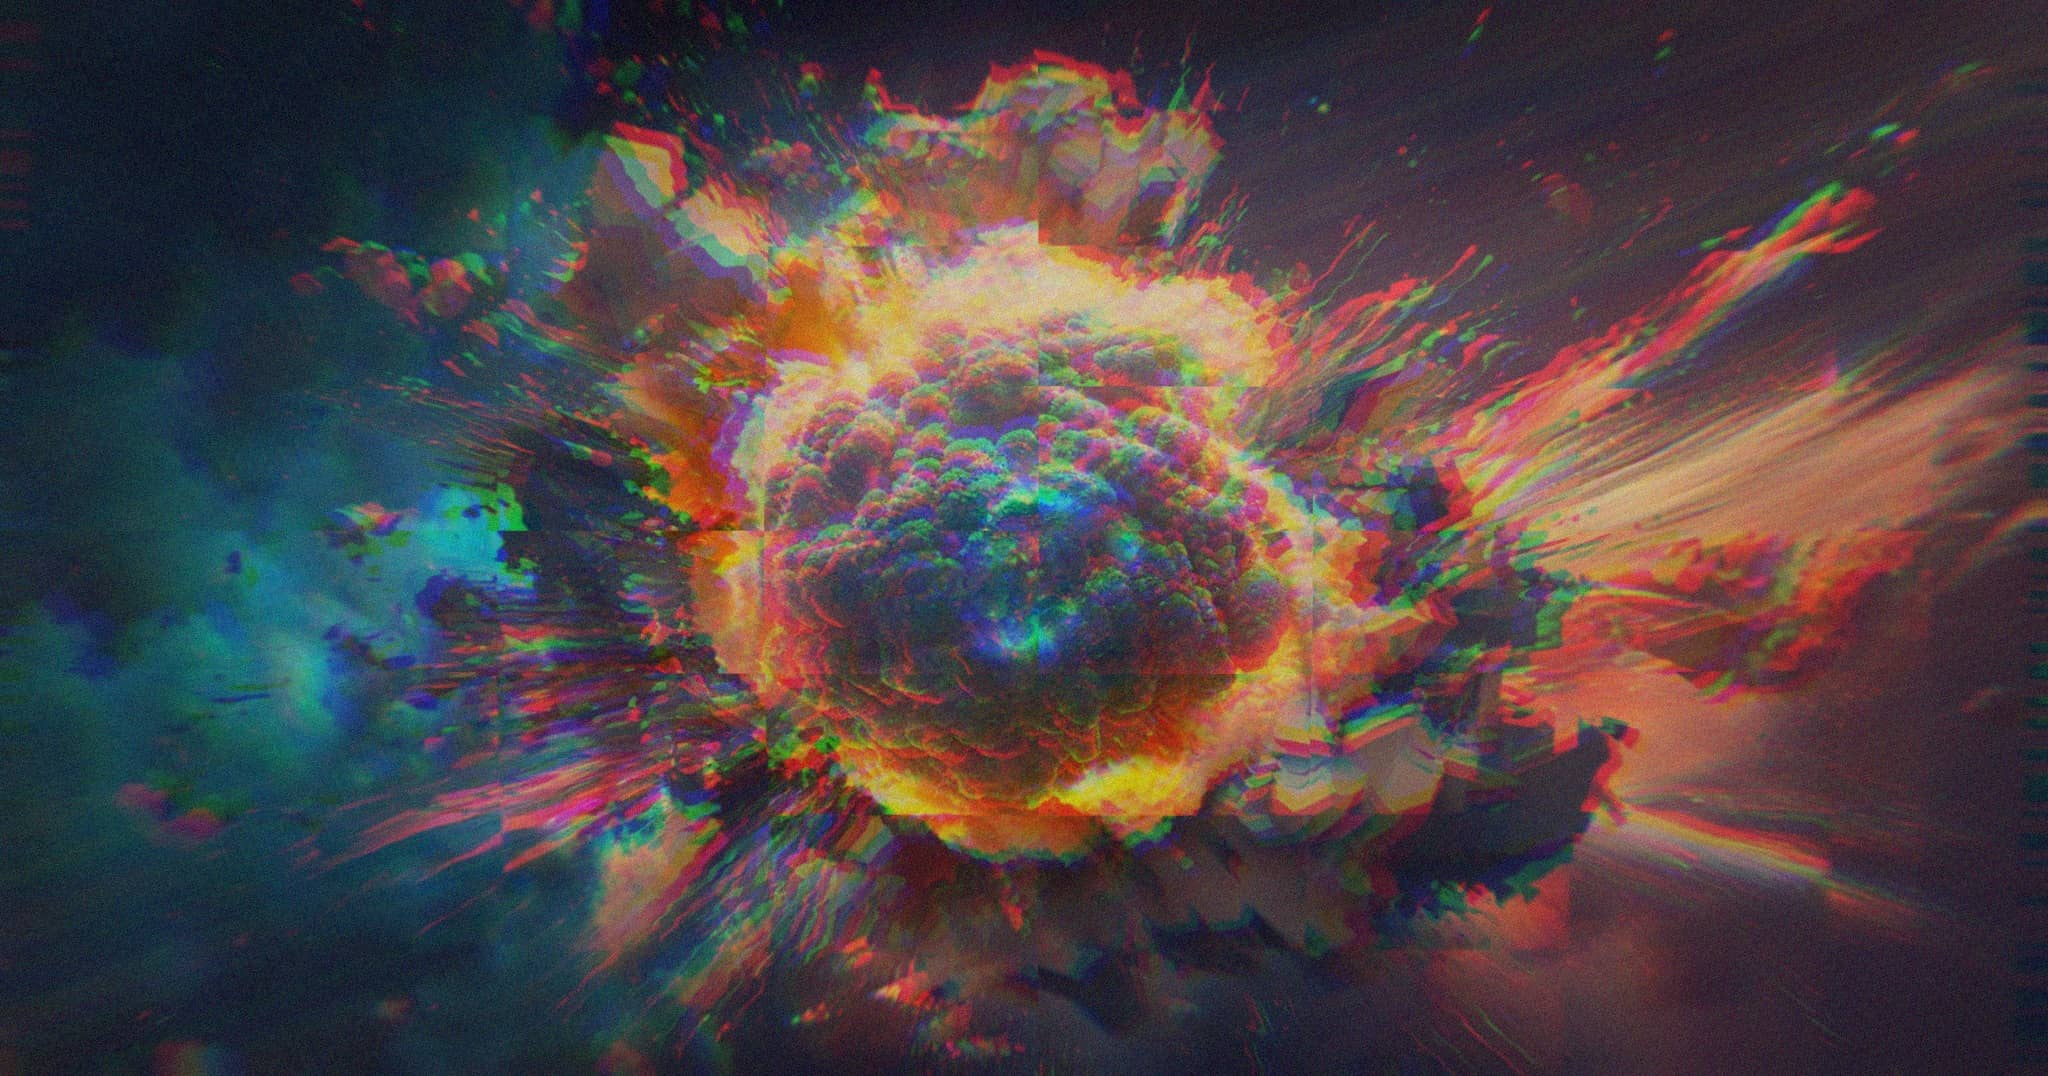 A colorful explosive burst in the sky.